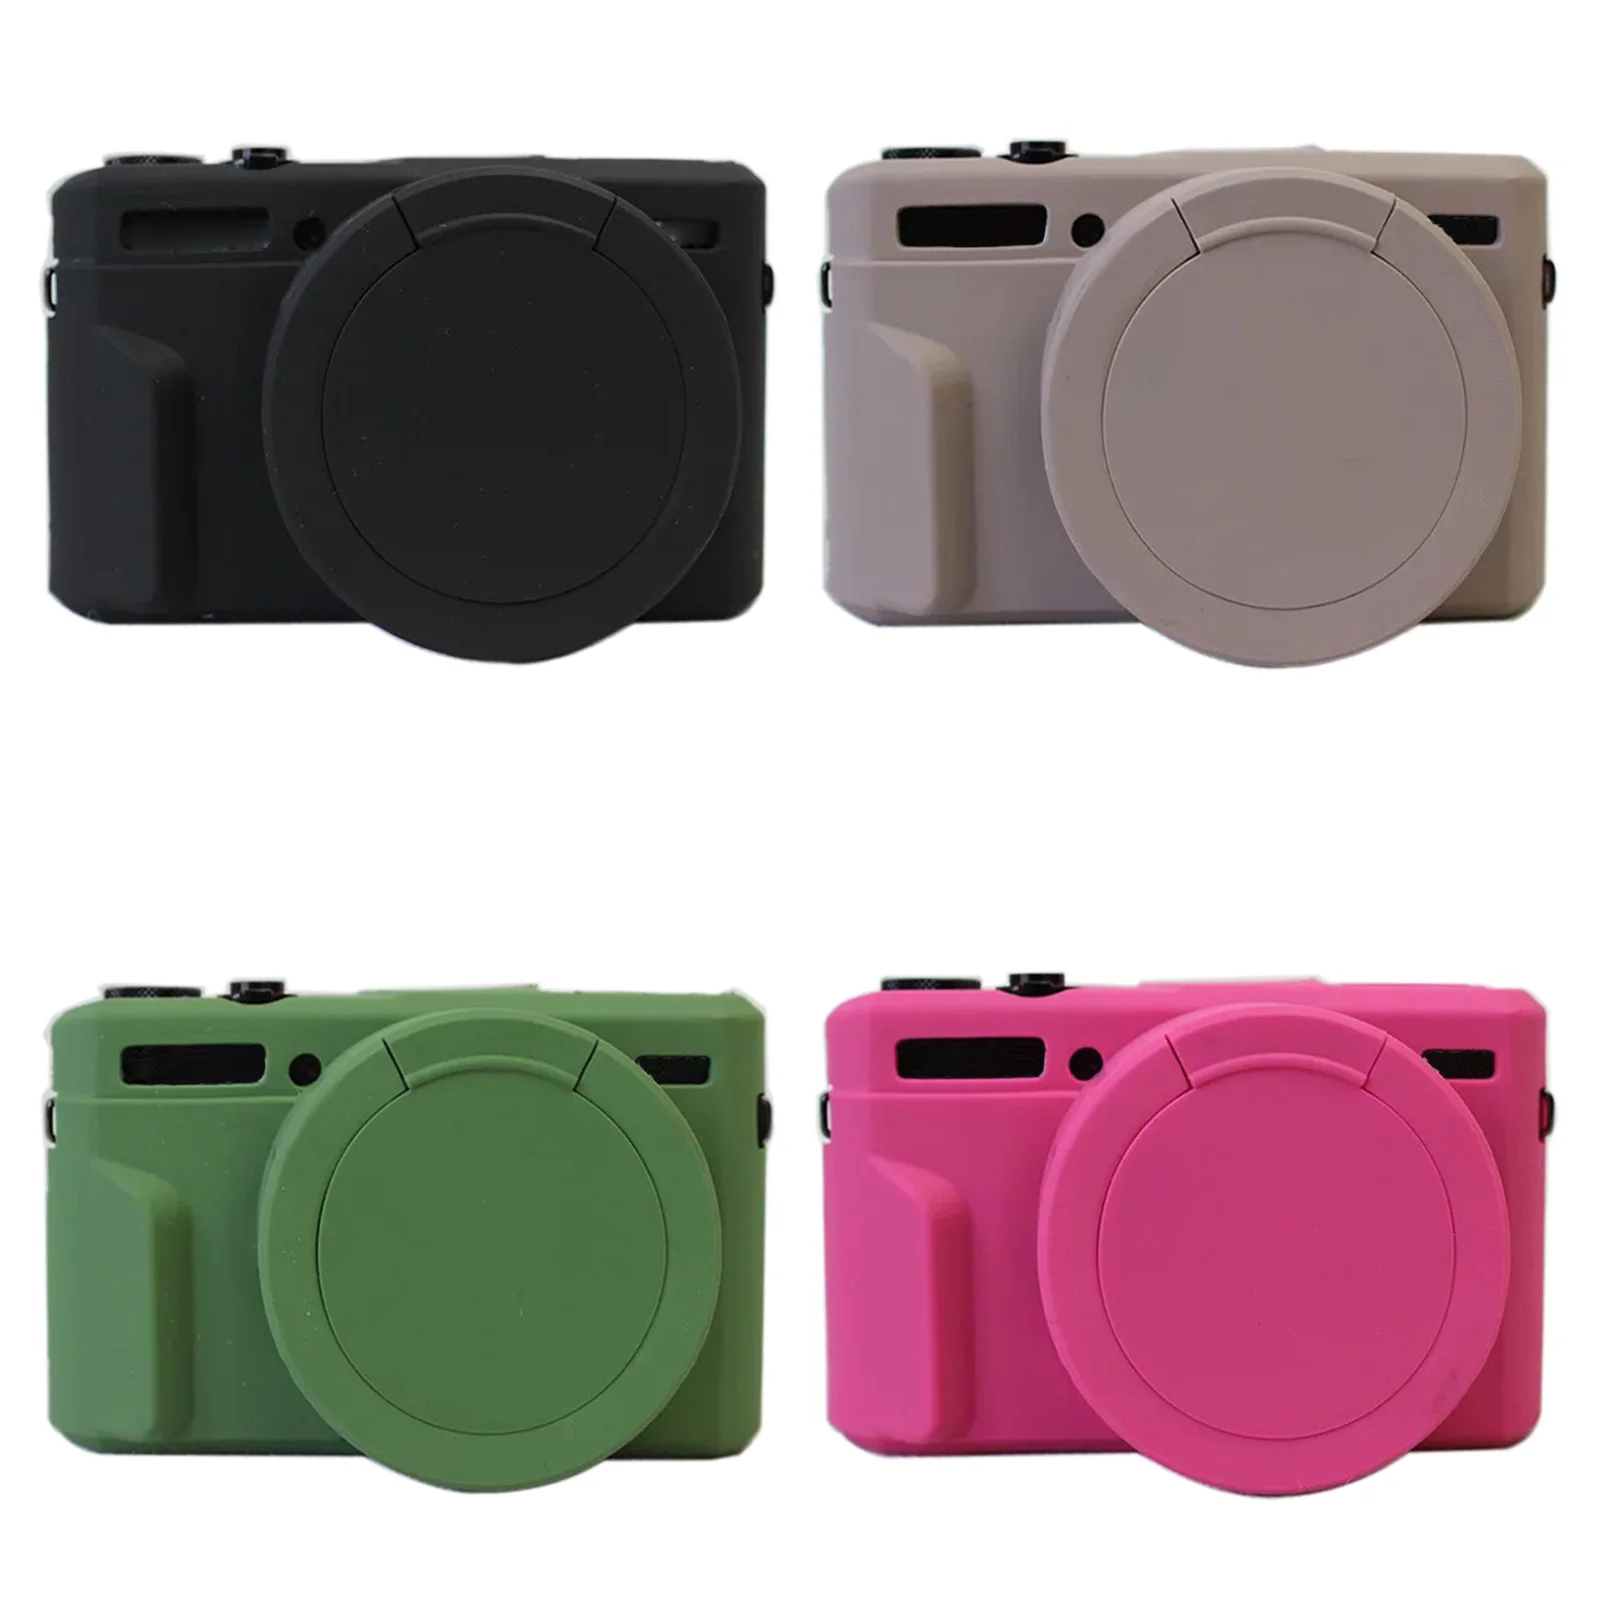 canon g7x mark iii case - Buy canon g7x mark iii case with free shipping on  AliExpress